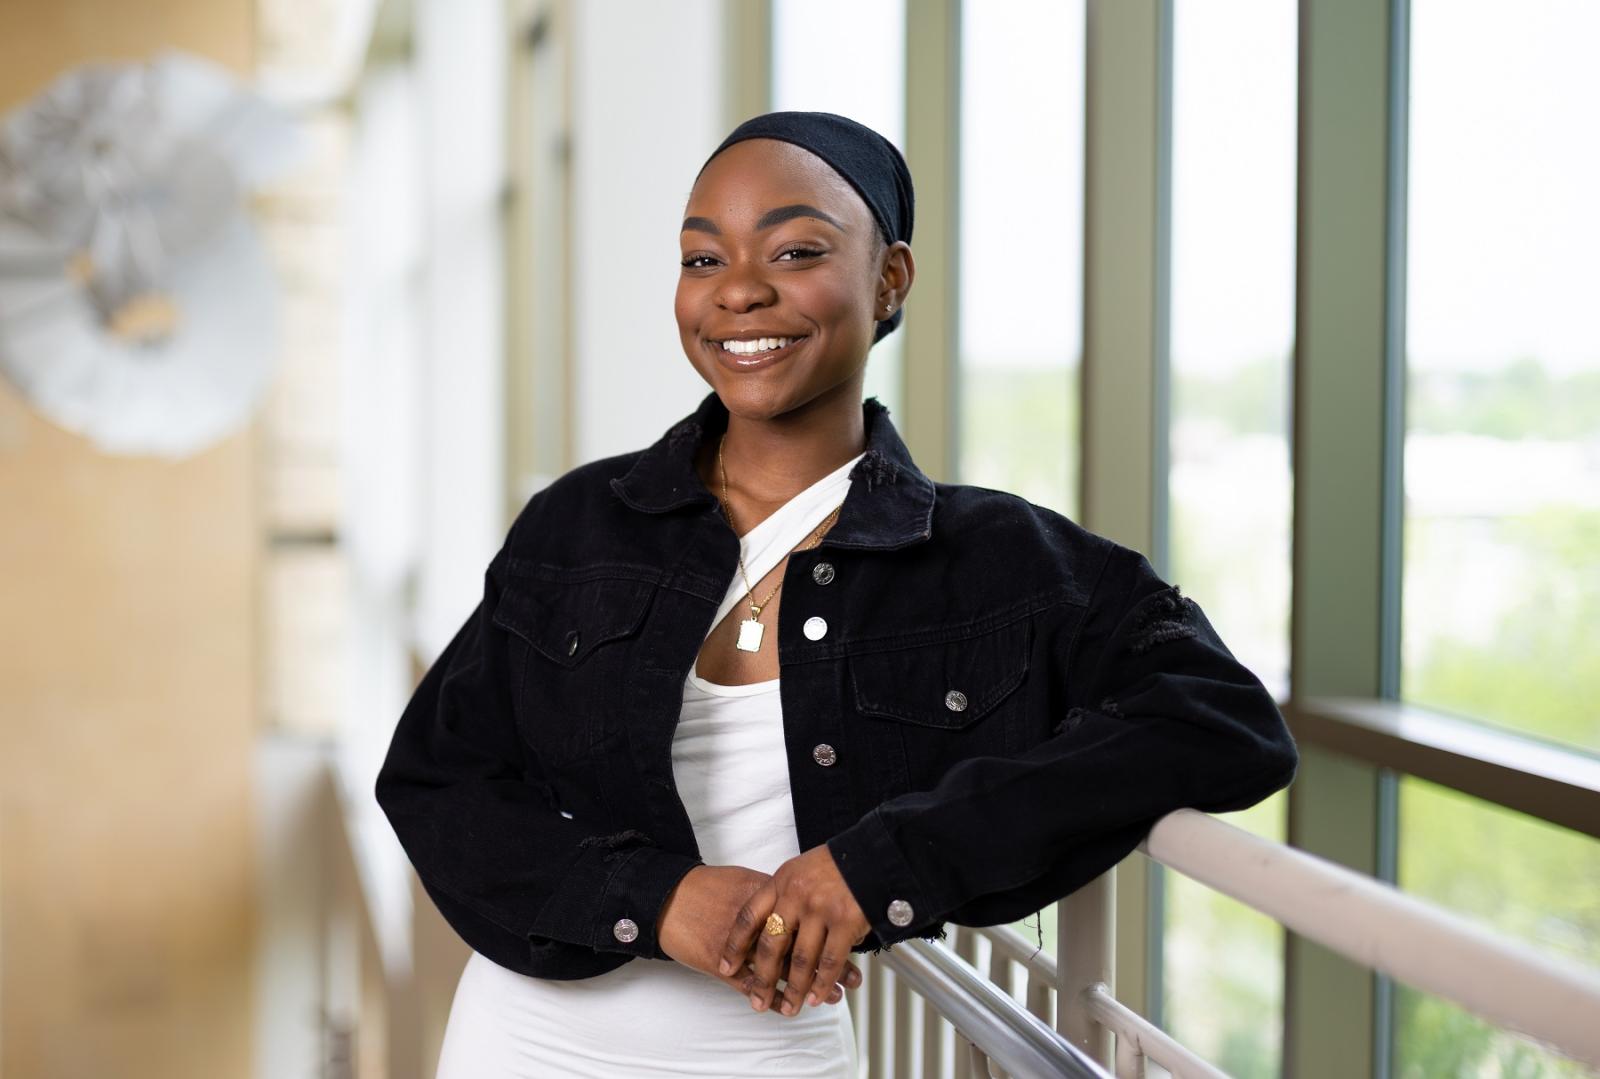 Monique Johnson poses for a portrait in front of the large windows in Warch Campus Center.